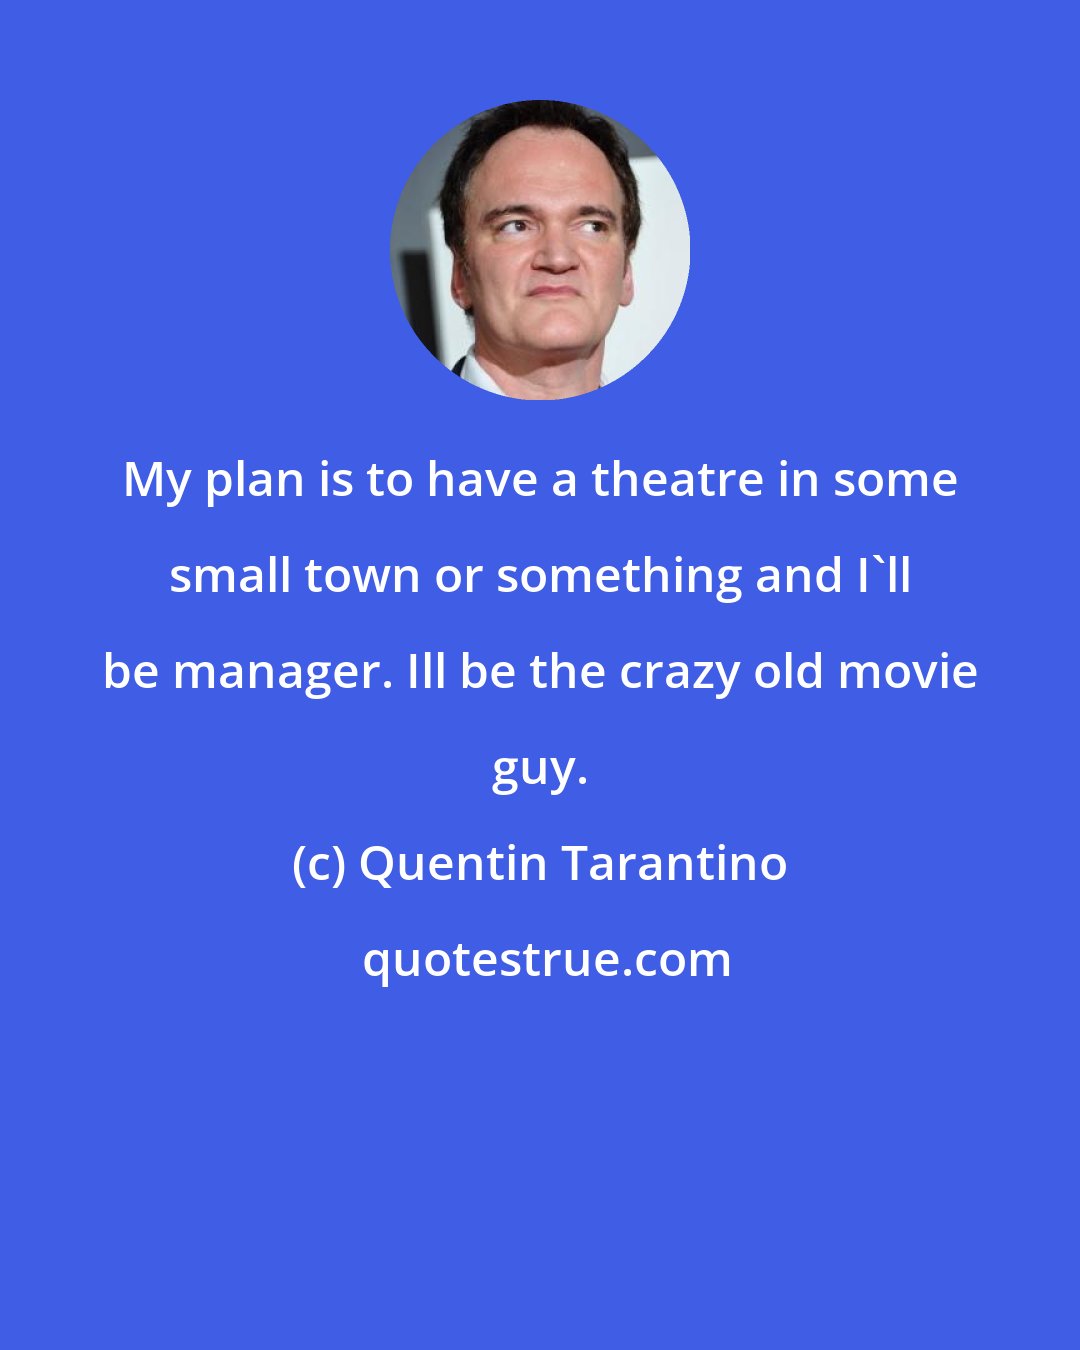 Quentin Tarantino: My plan is to have a theatre in some small town or something and I'll be manager. Ill be the crazy old movie guy.